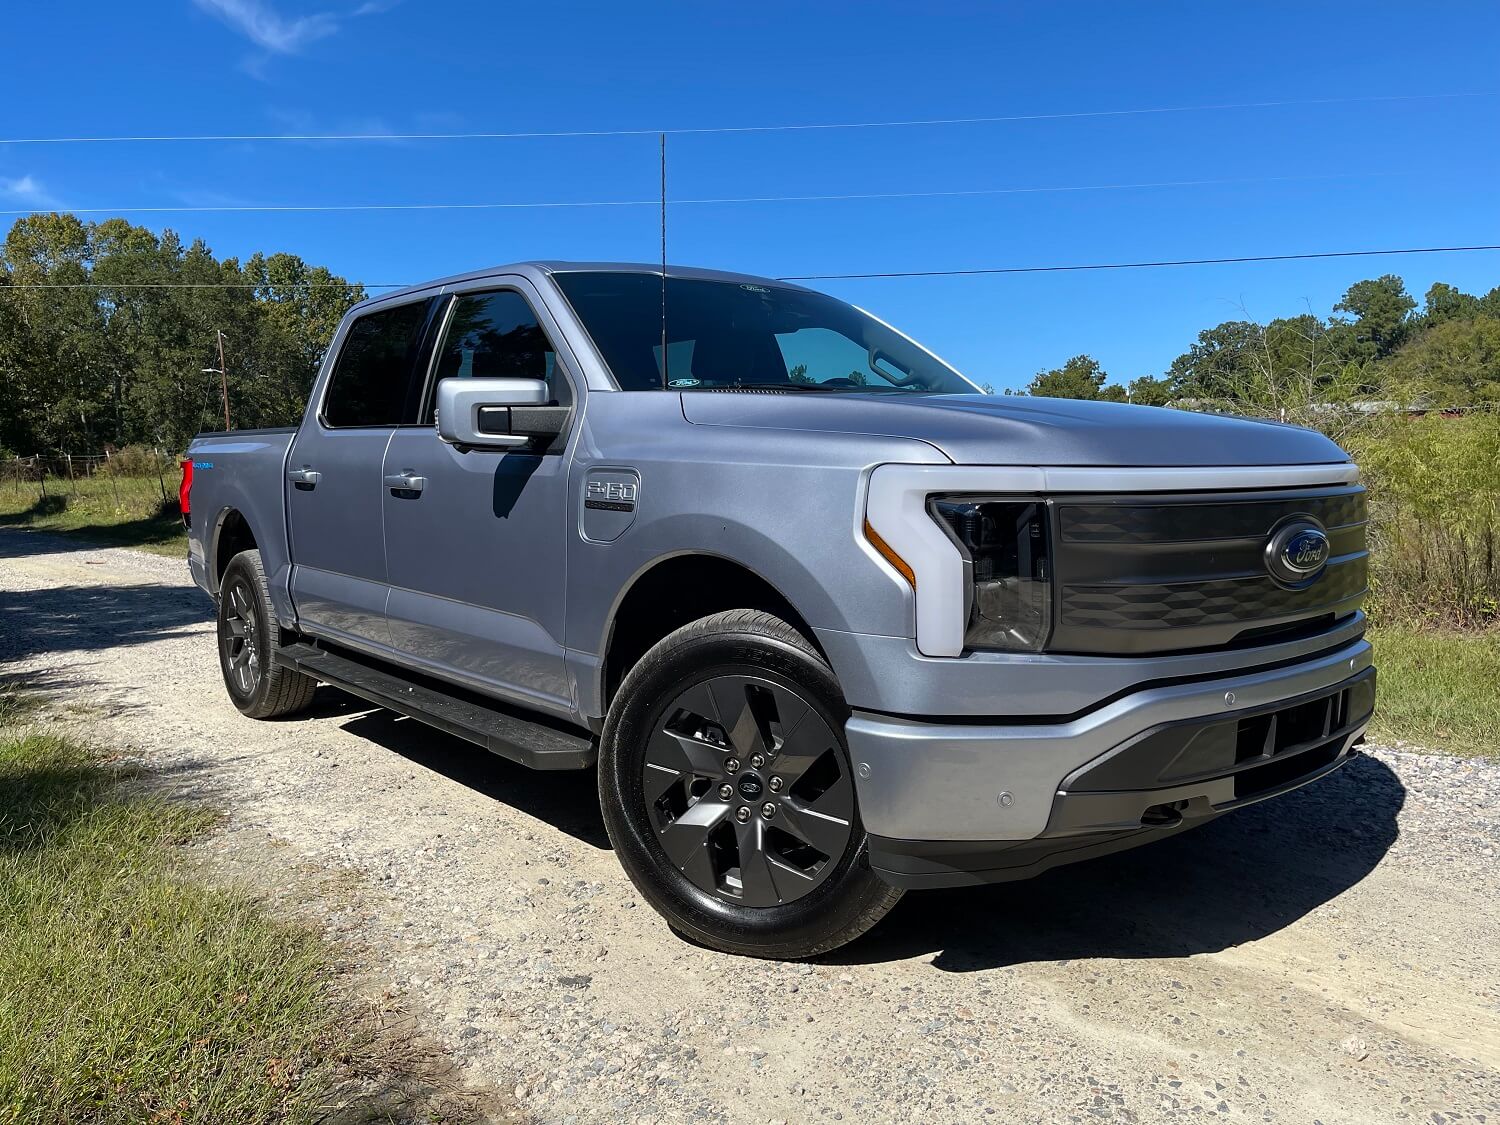 2022 Ford F-150 Lightning might not be as efficient as we think.